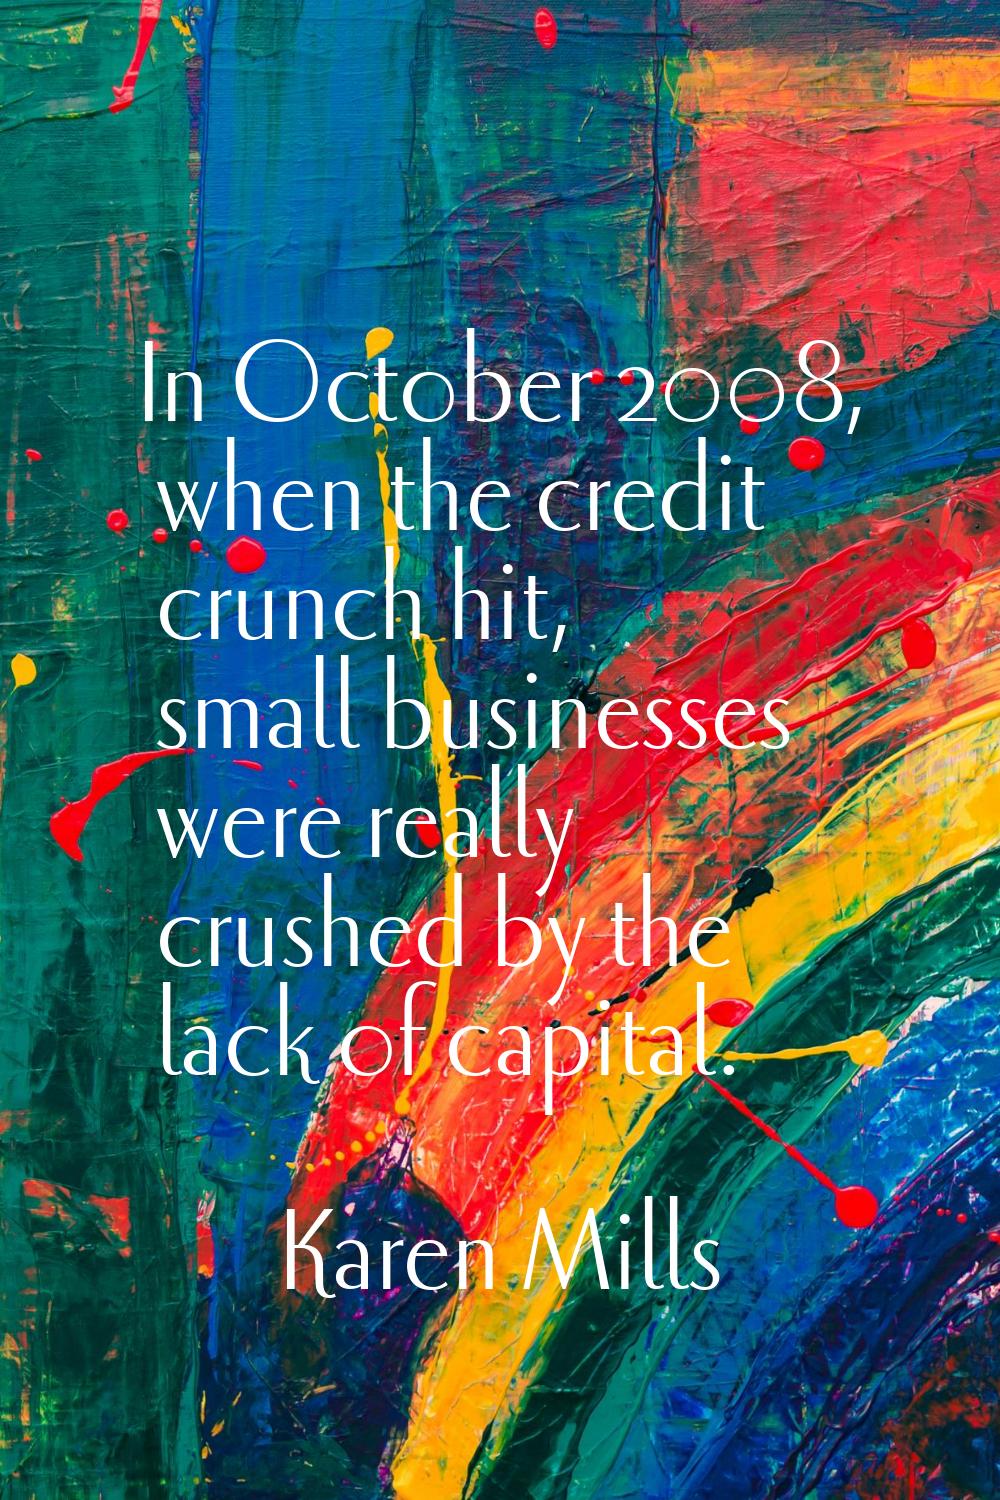 In October 2008, when the credit crunch hit, small businesses were really crushed by the lack of ca